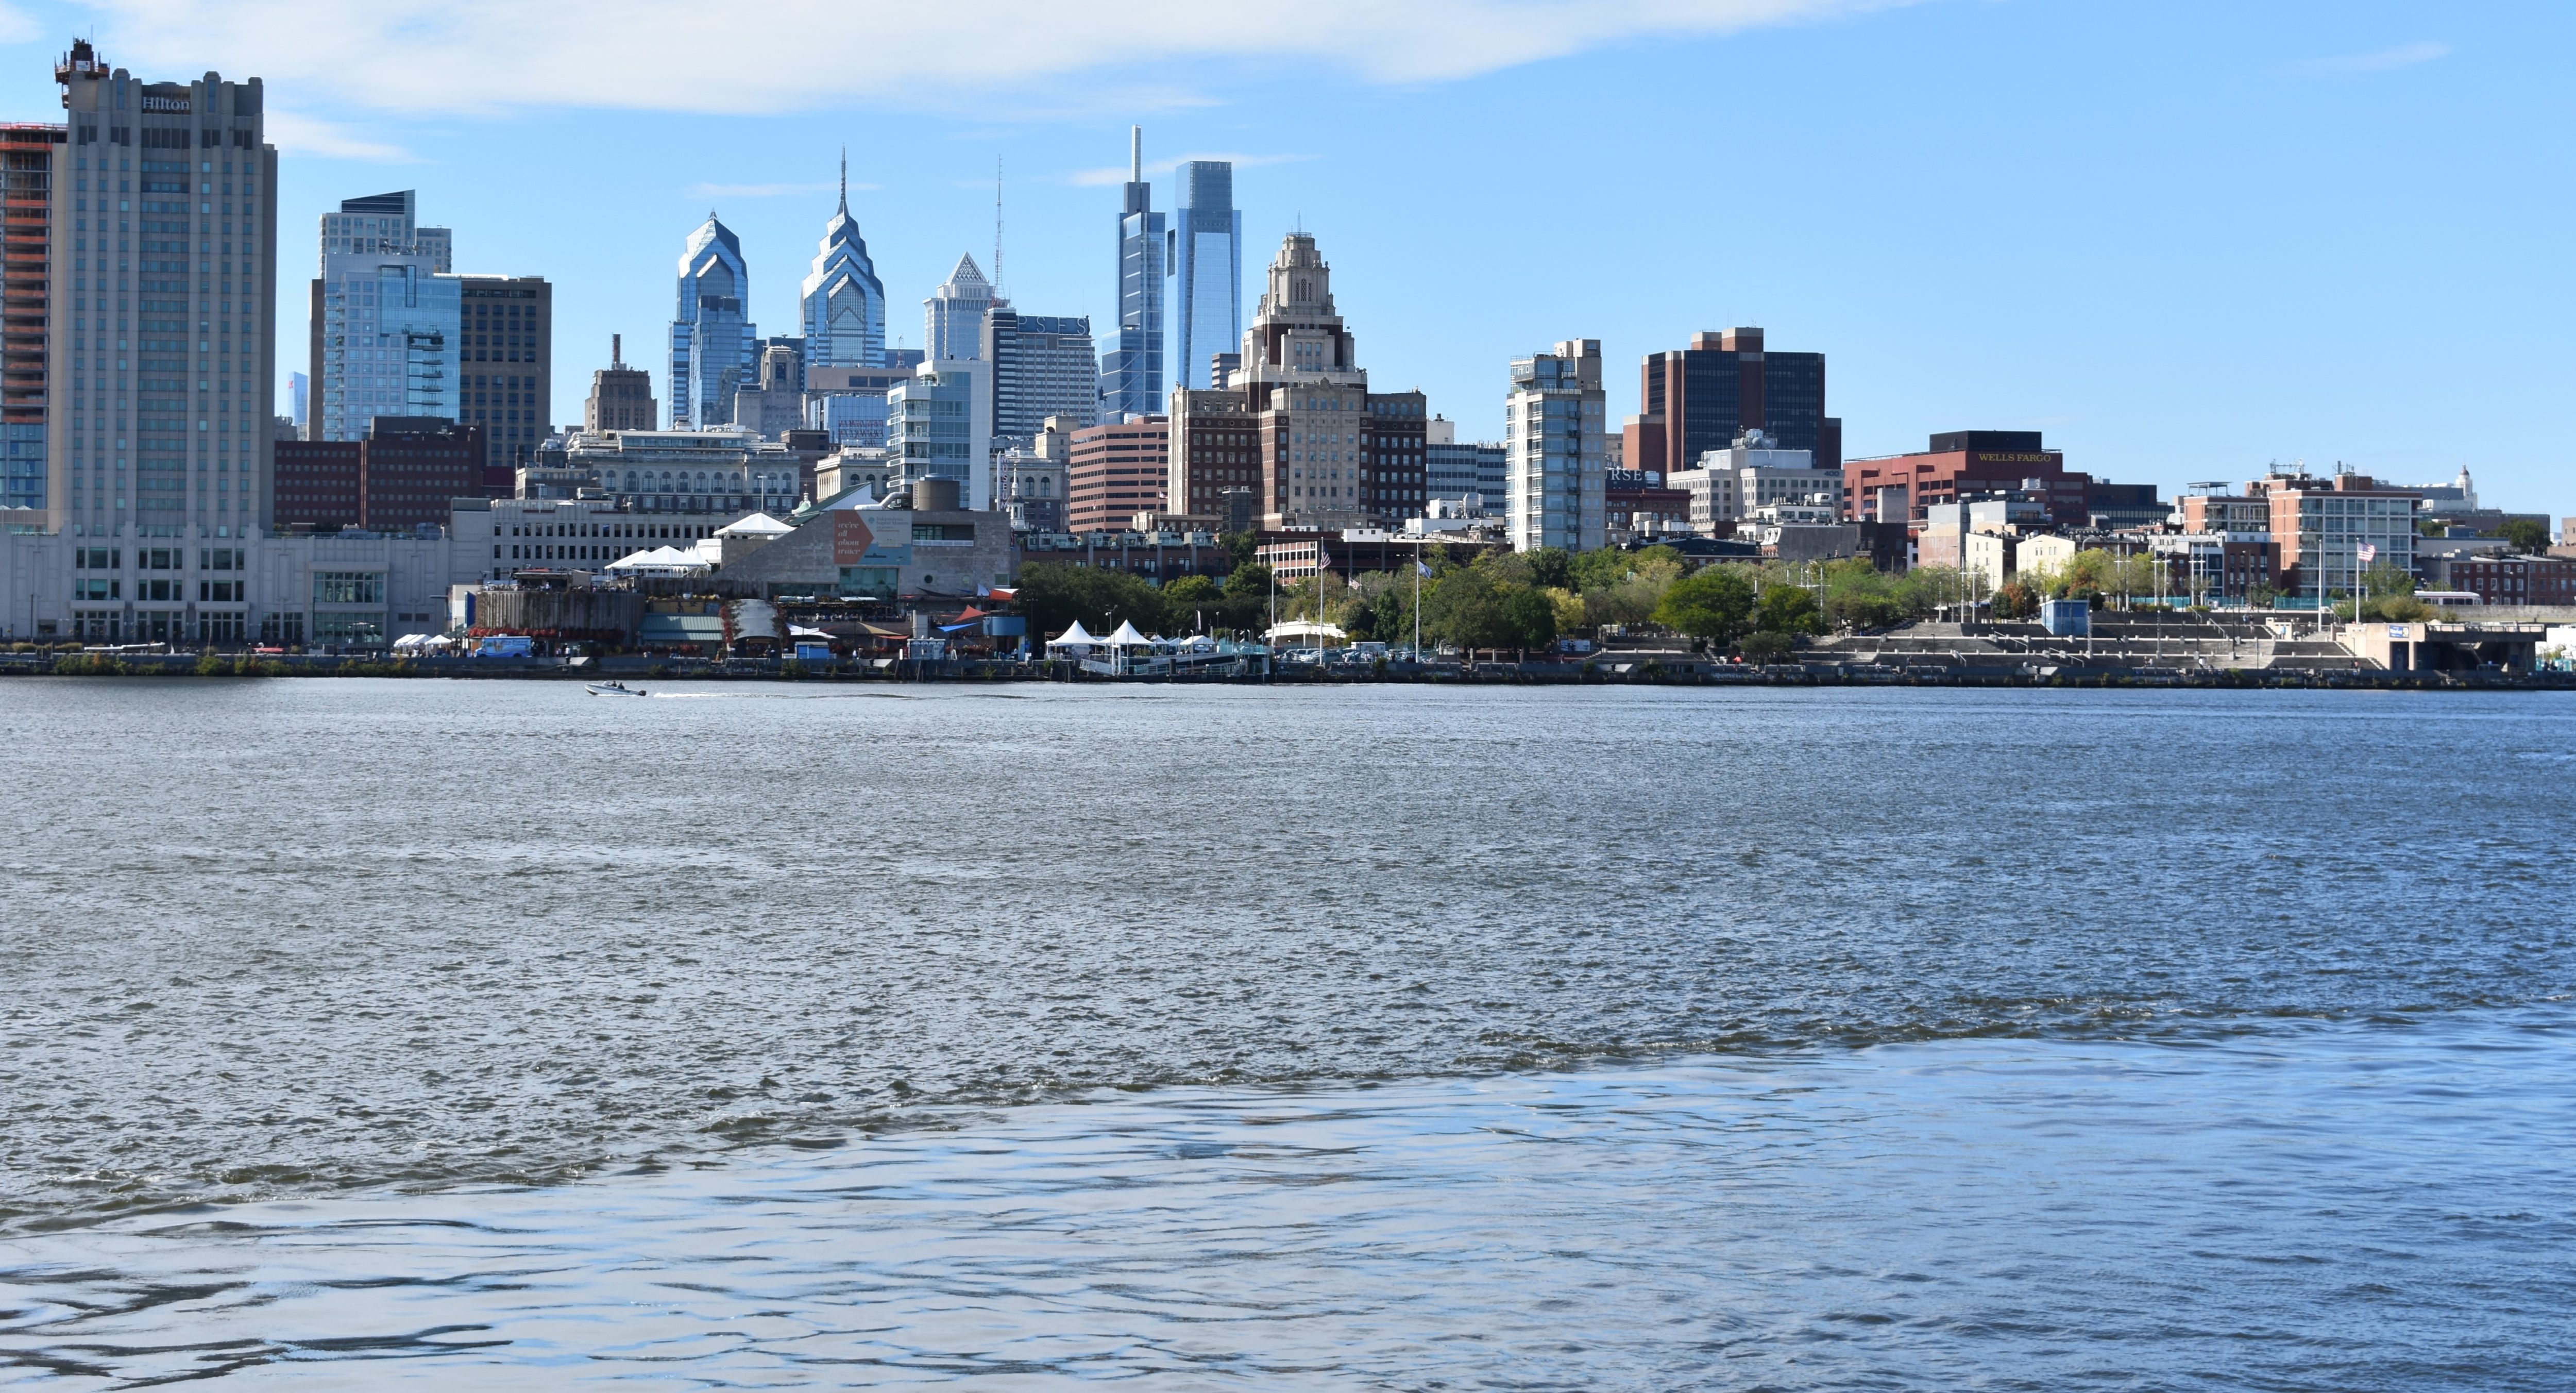 Looking out over the Delaware River from Camden, NJ, on a beautiful day, the Philadelphia skyline shines between a mostly blue sky and the shimmering river. The tents, crowds, and an ice cream truck for Delaware River Fest 2022 are visible on Penn's Landing.